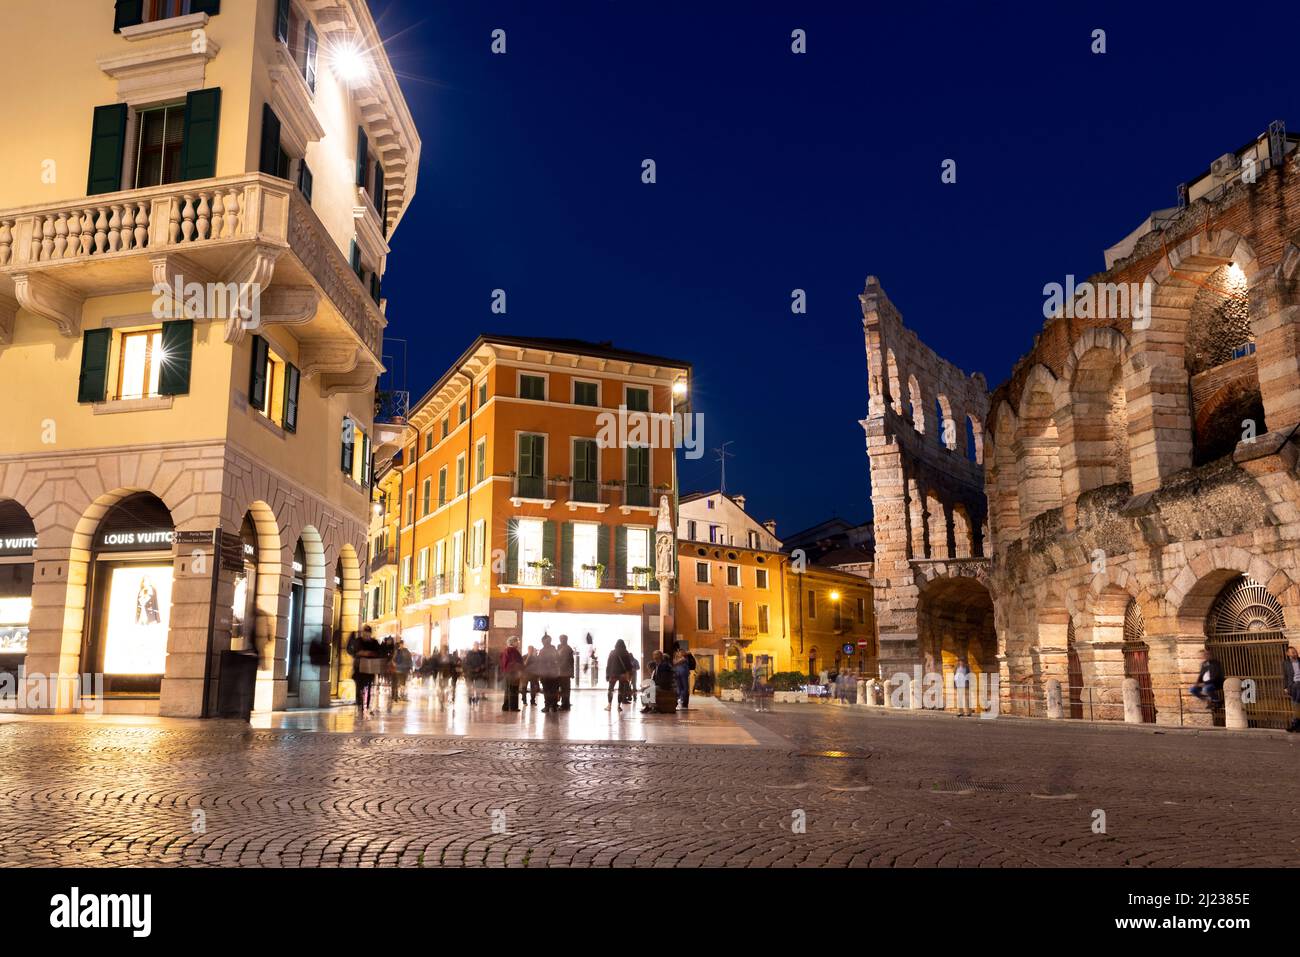 Italy, Verona, the Arena di Verona, a Roman amphitheatre at dusk with people in the historic Old town of the city at twilight. Stock Photo